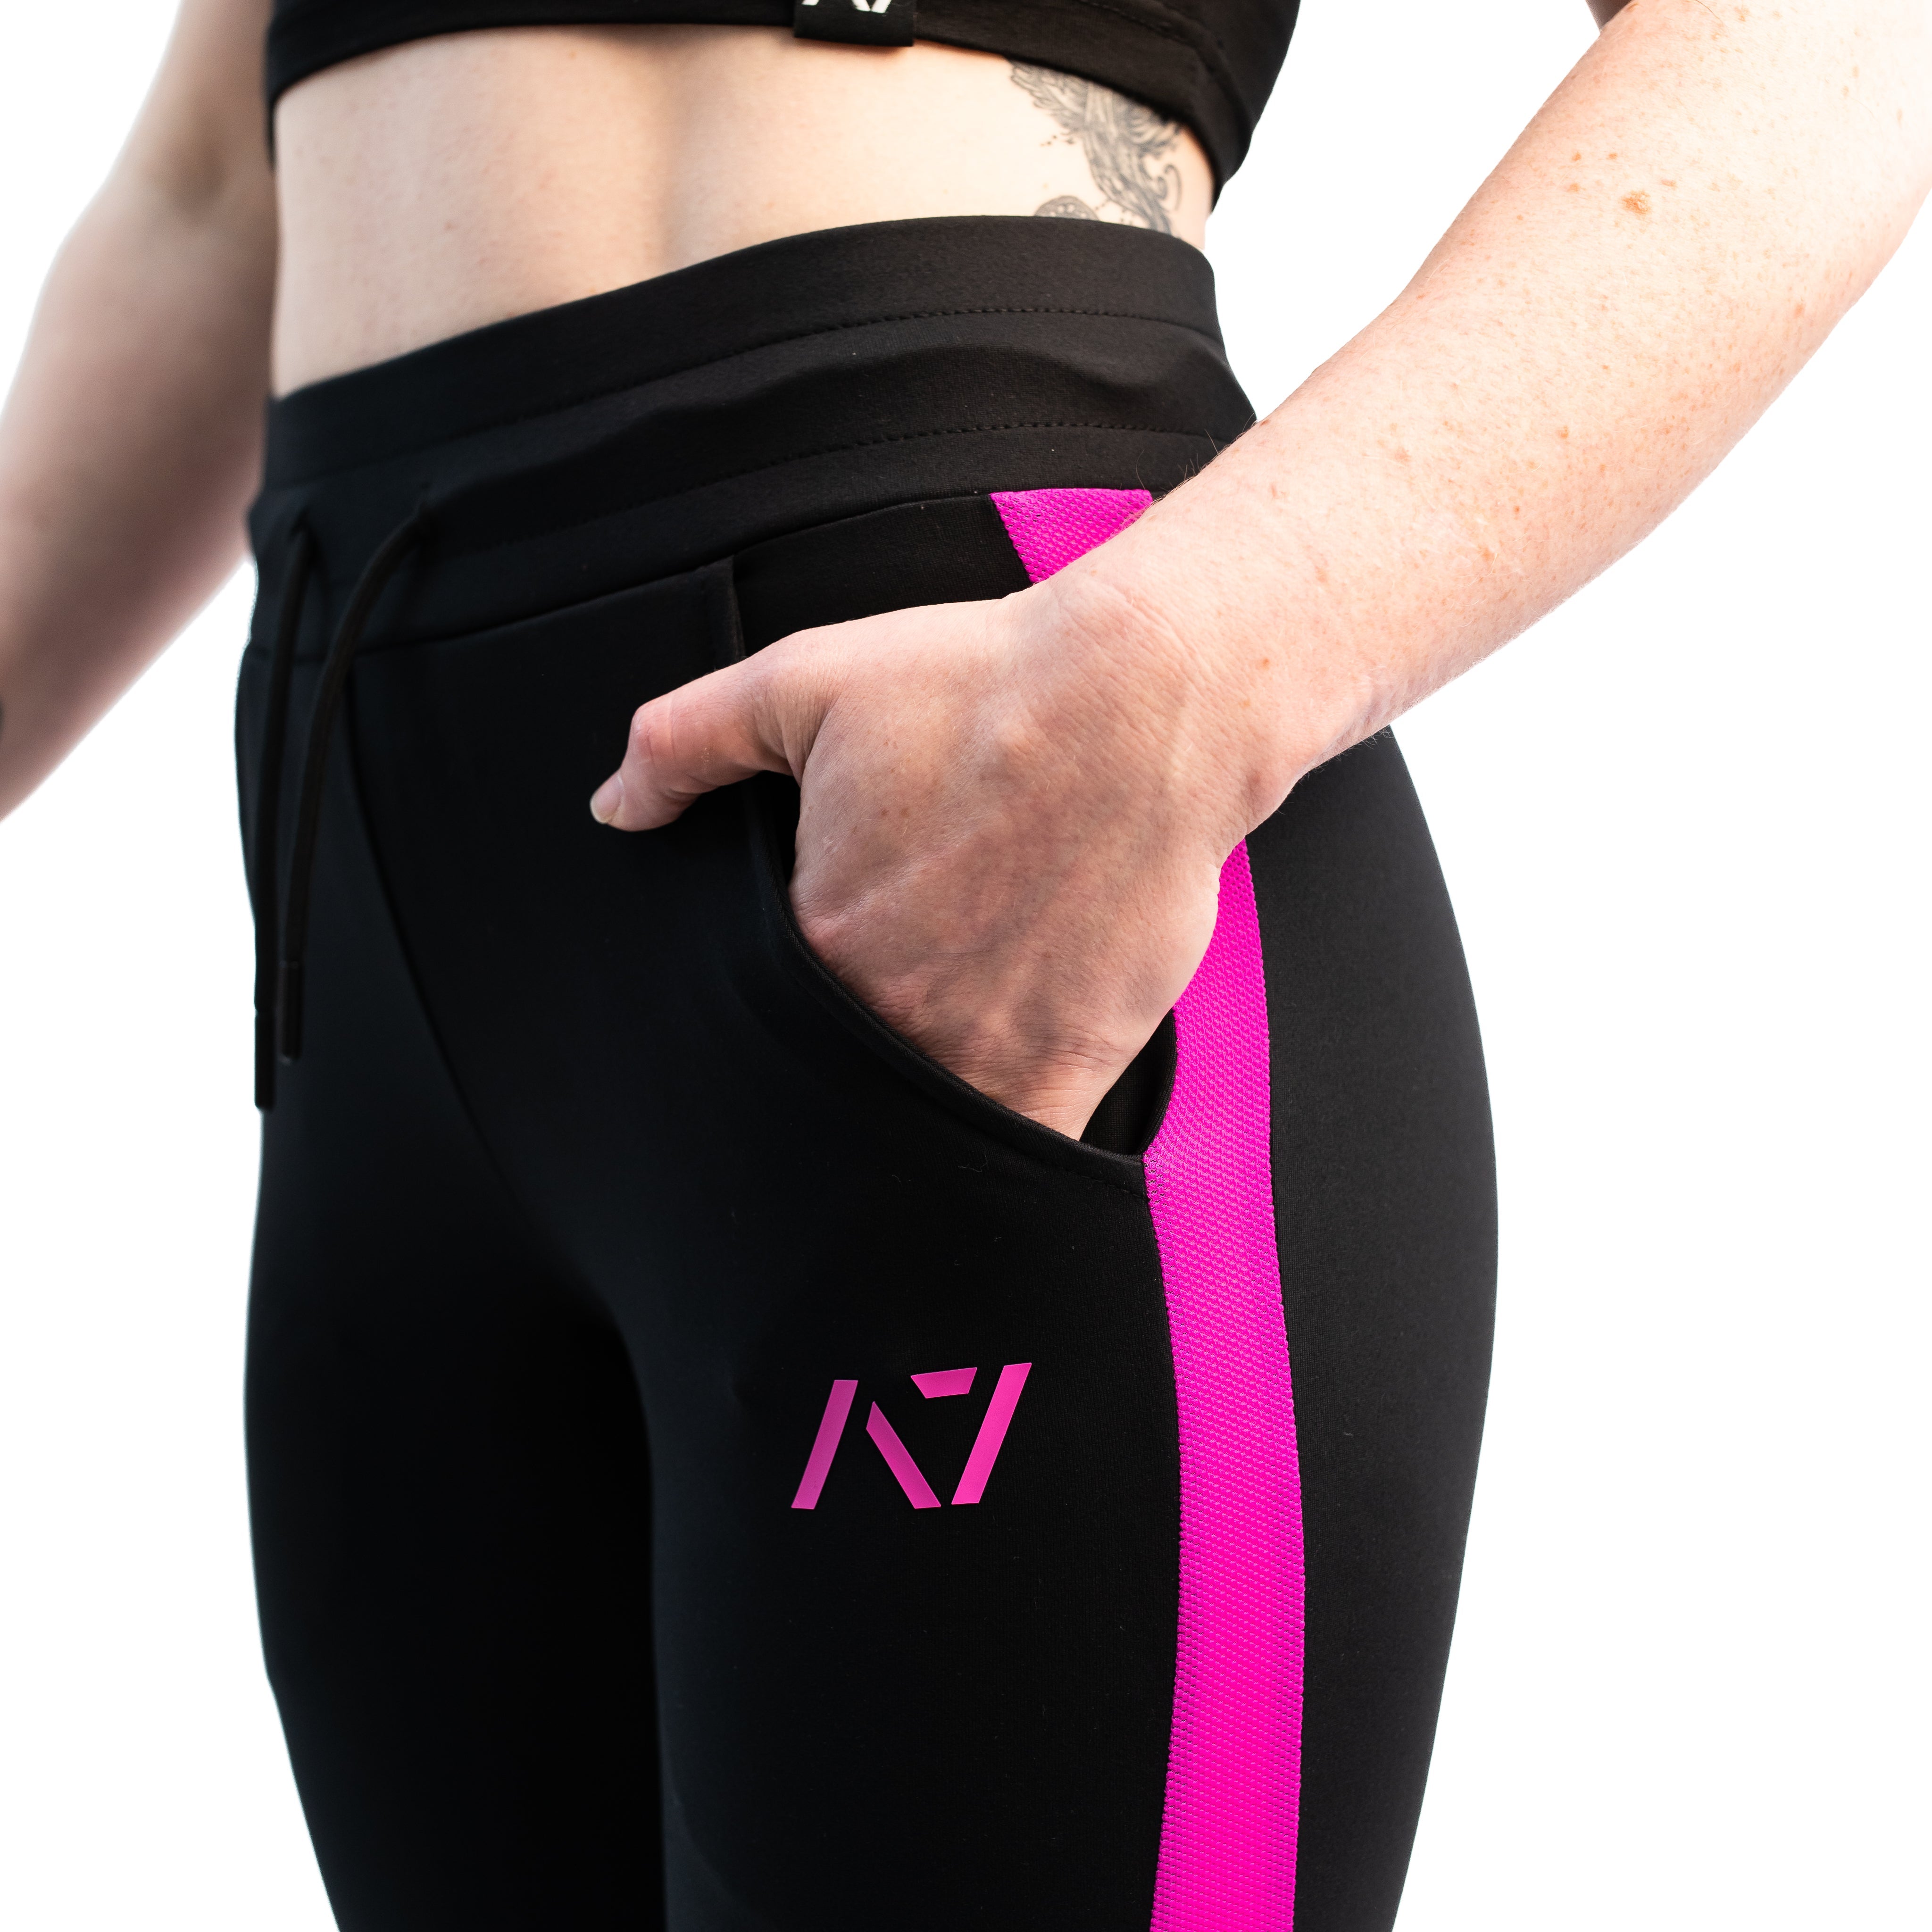 A7’s newest Women's Joggers are made with the same premium Defy fabric you have come to love, but with female curves (flexure) in mind! Using 4-way-stretch material, these flexure joggers are specifically designed for Women's unique shape. Flexure women’s joggers in pink are available to buy from A7UK for shipping to UK and Europe.